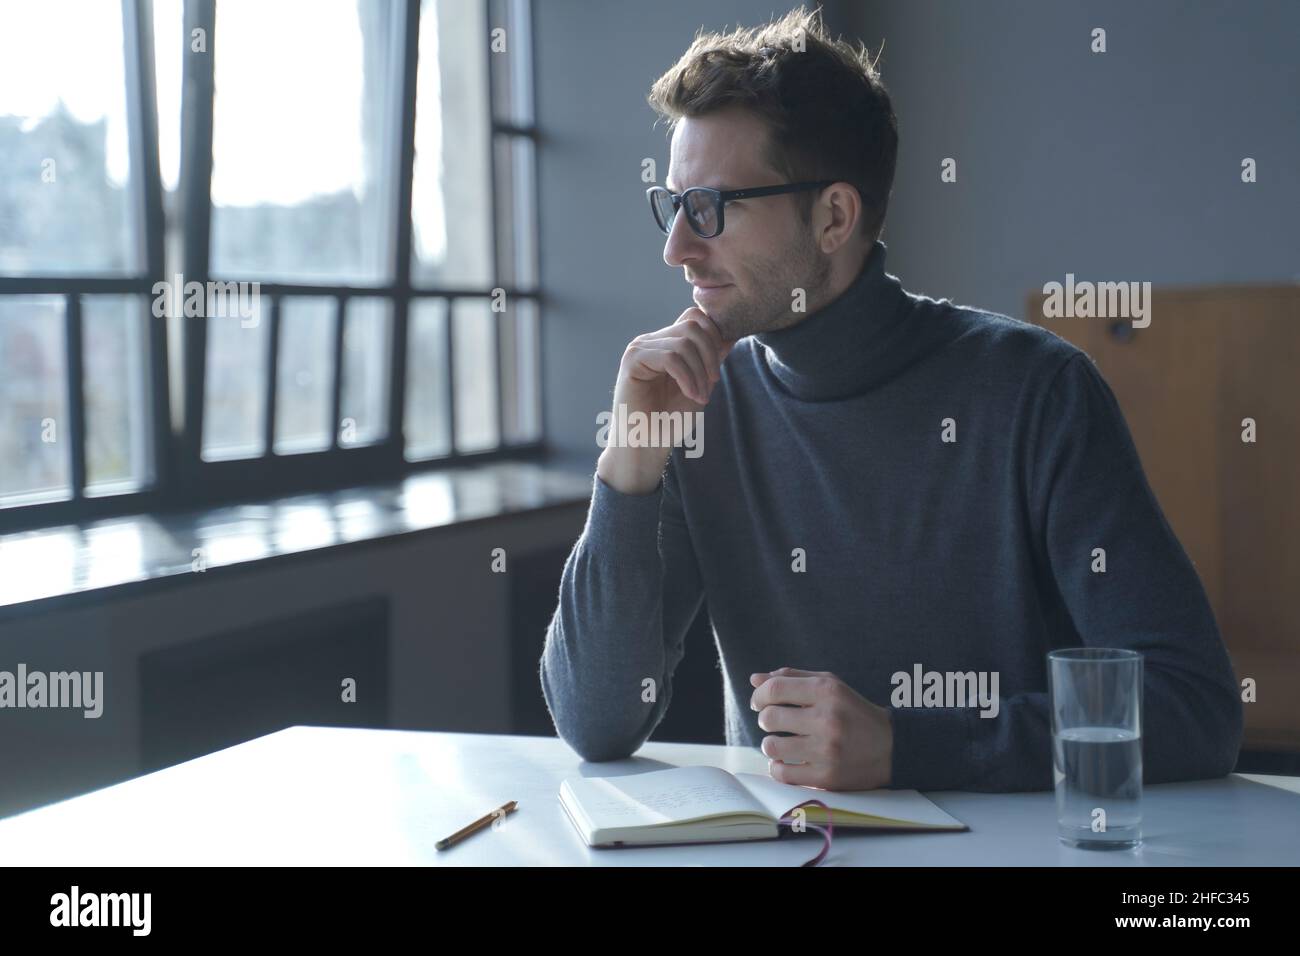 Young pensive thoughtful German man sitting at desk and looking out window Stock Photo